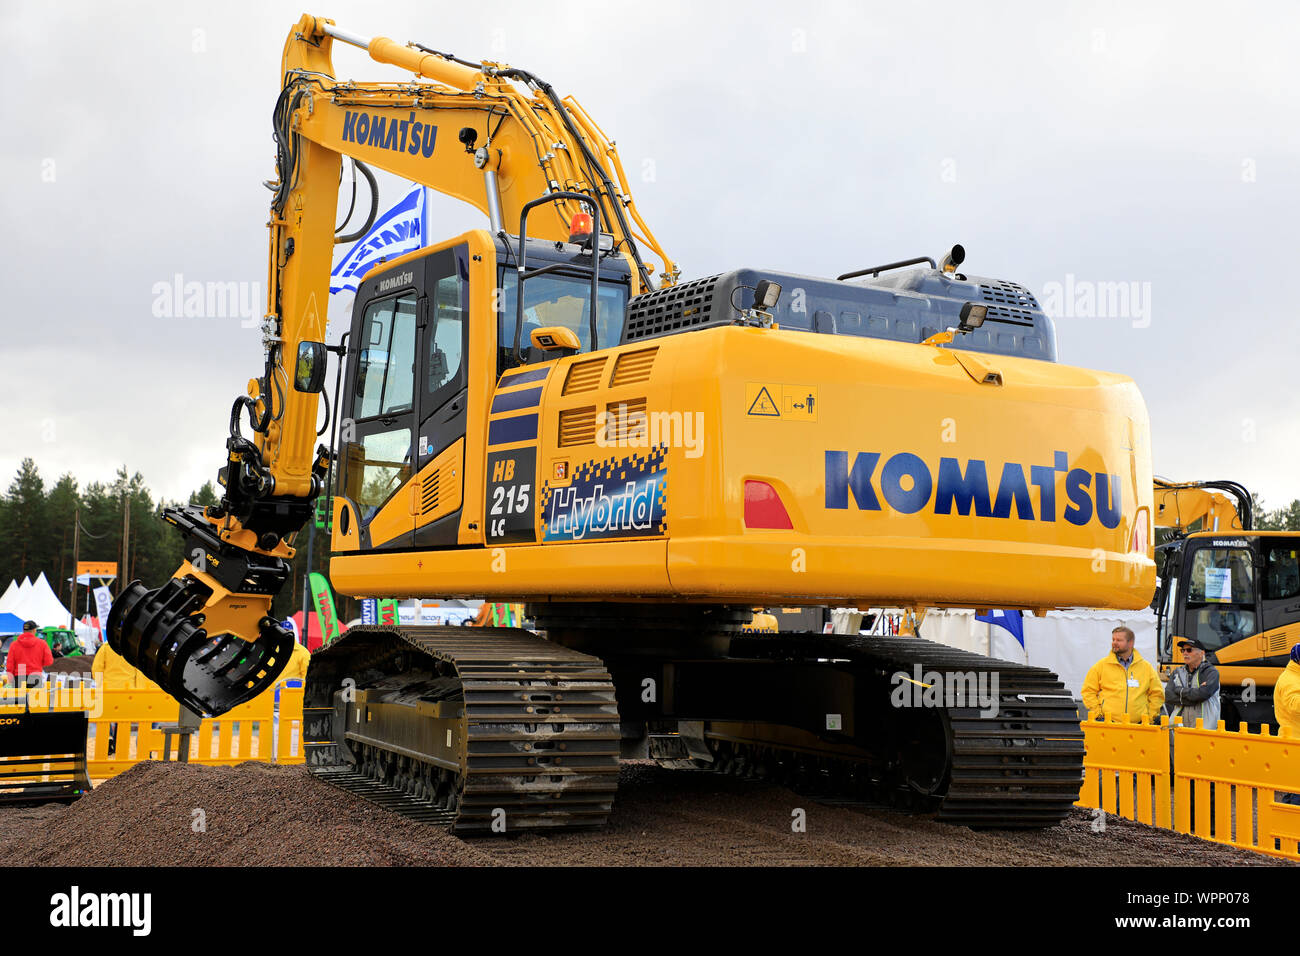 Hyvinkää, Finland. September 6, 2019. Komatsu HB 215 LC Hybrid excavator operator shows great precision by picking pack of cards with the grapple. Stock Photo